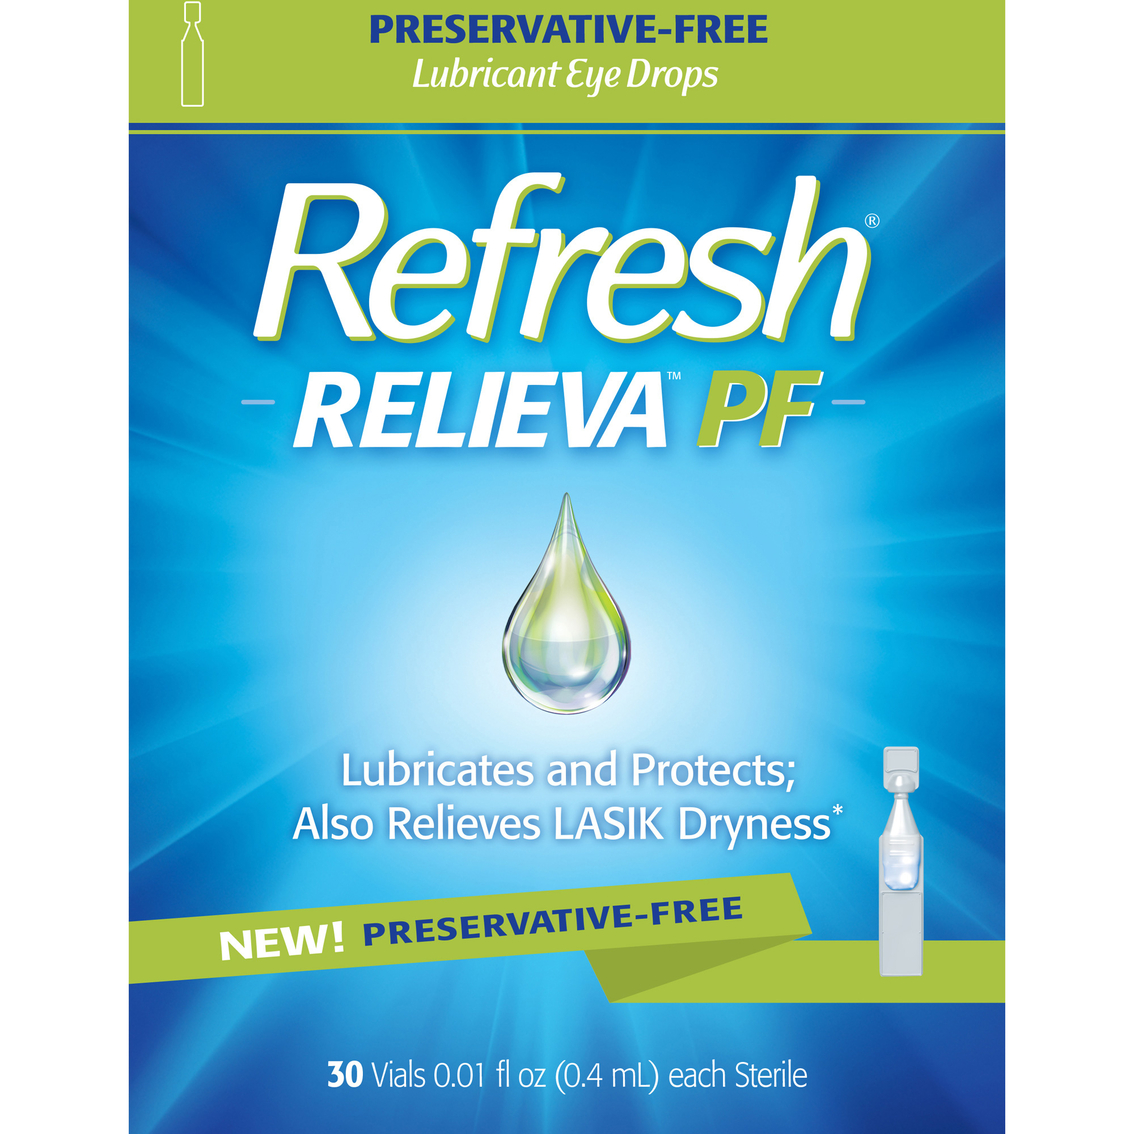 Refresh Relieva Preservative Free Lubricant Eye Drops 30 ct. - Image 2 of 5